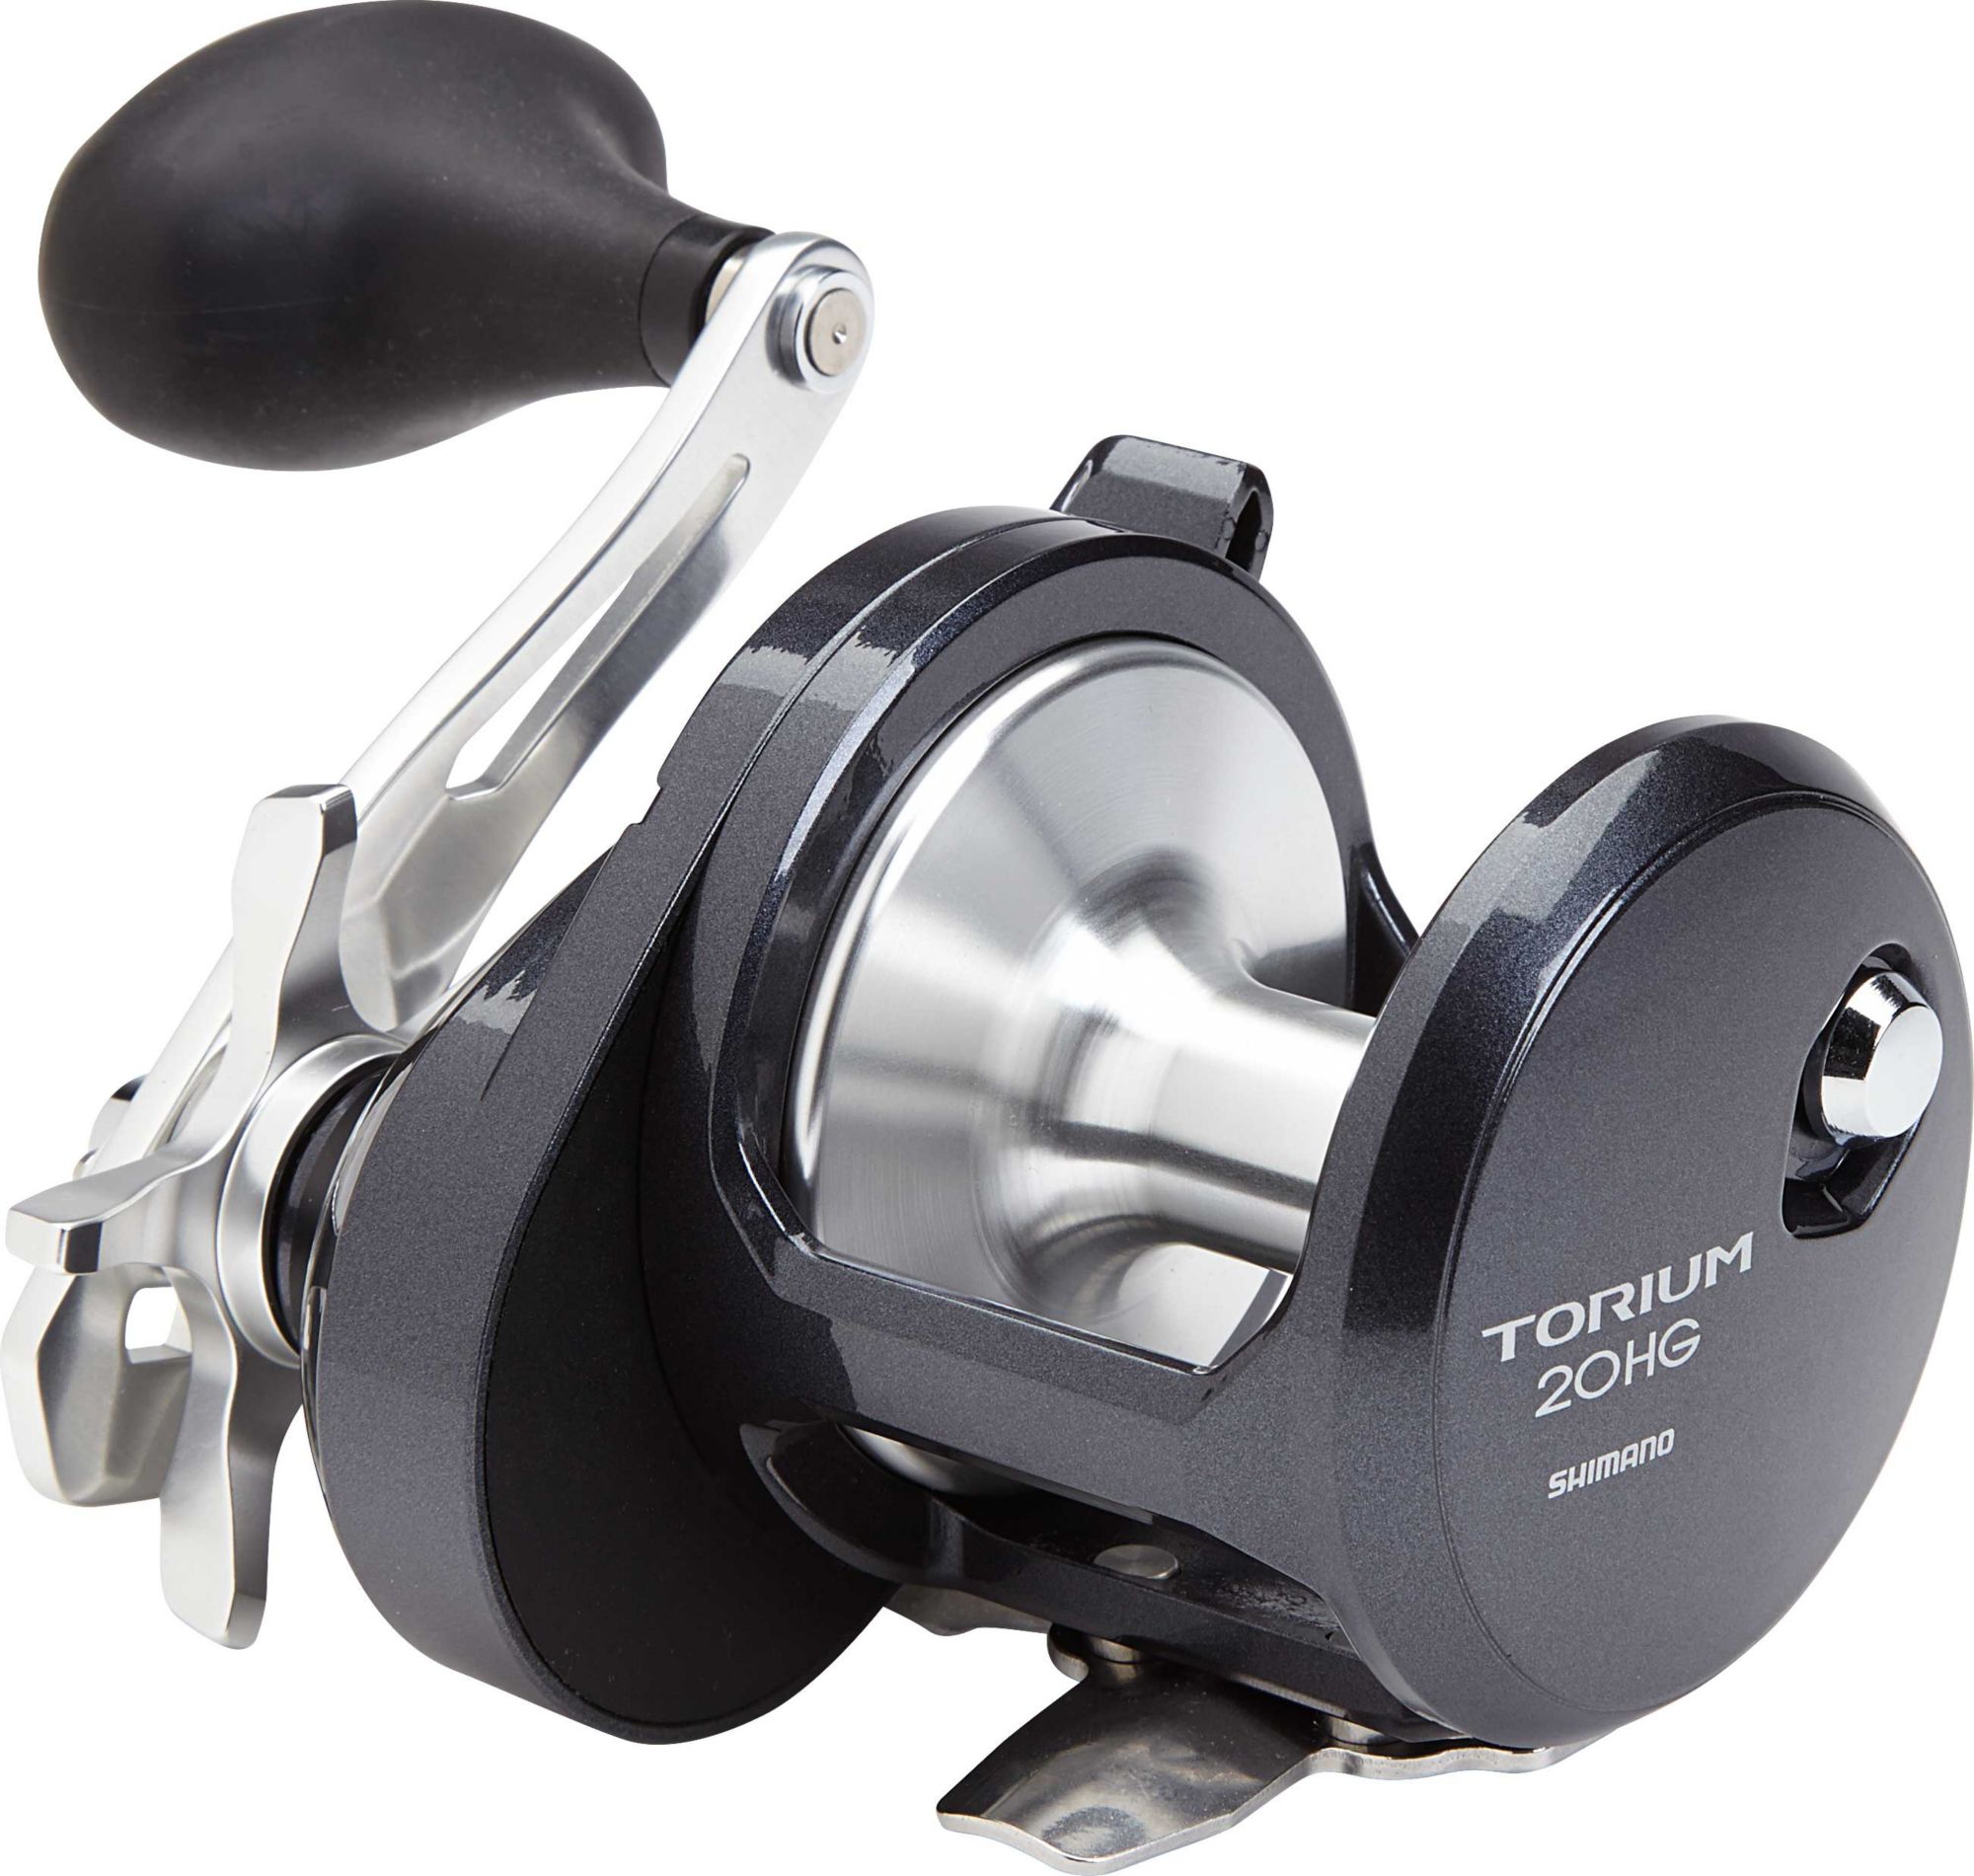 Photos - Other for Fishing Shimano Torium Conventional Reel 16SHMUTRM20HGHGRSREE 